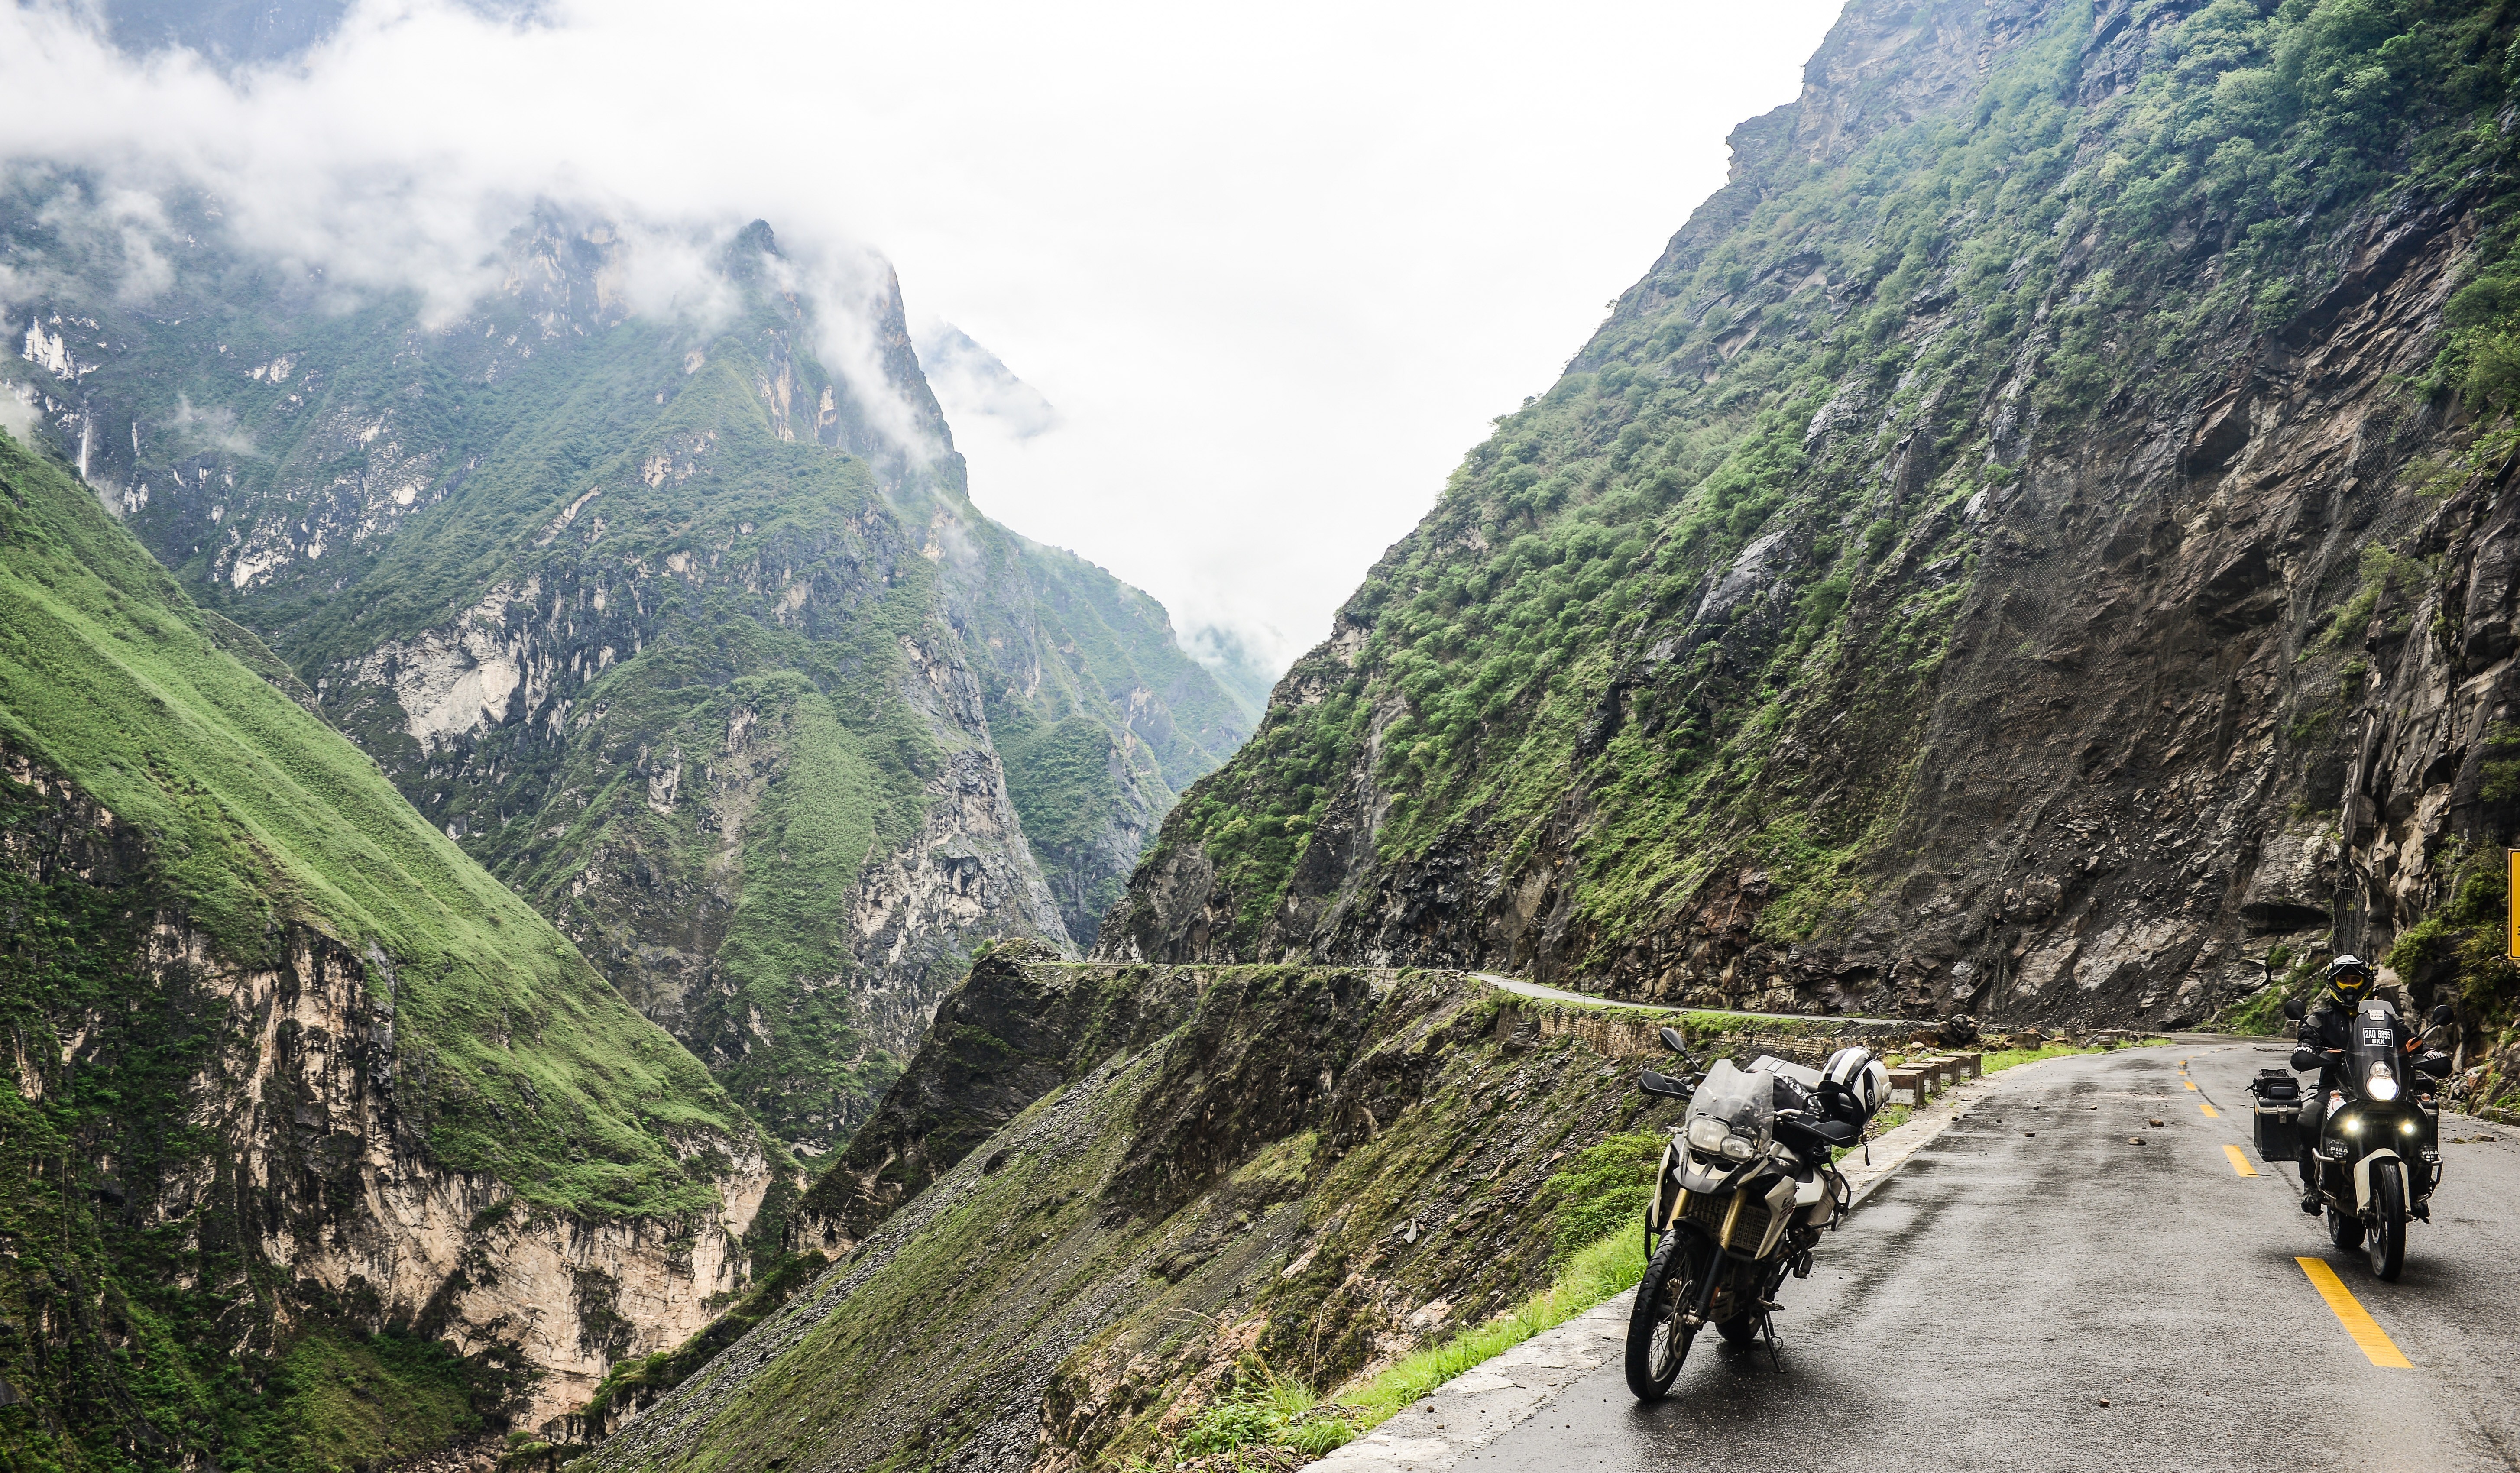 Thailand to Tibet, China motorcycle tours with Motoasia. Ride across Tibet and Himalayan mountain passes in one of the best motorcycle tours in Asia.